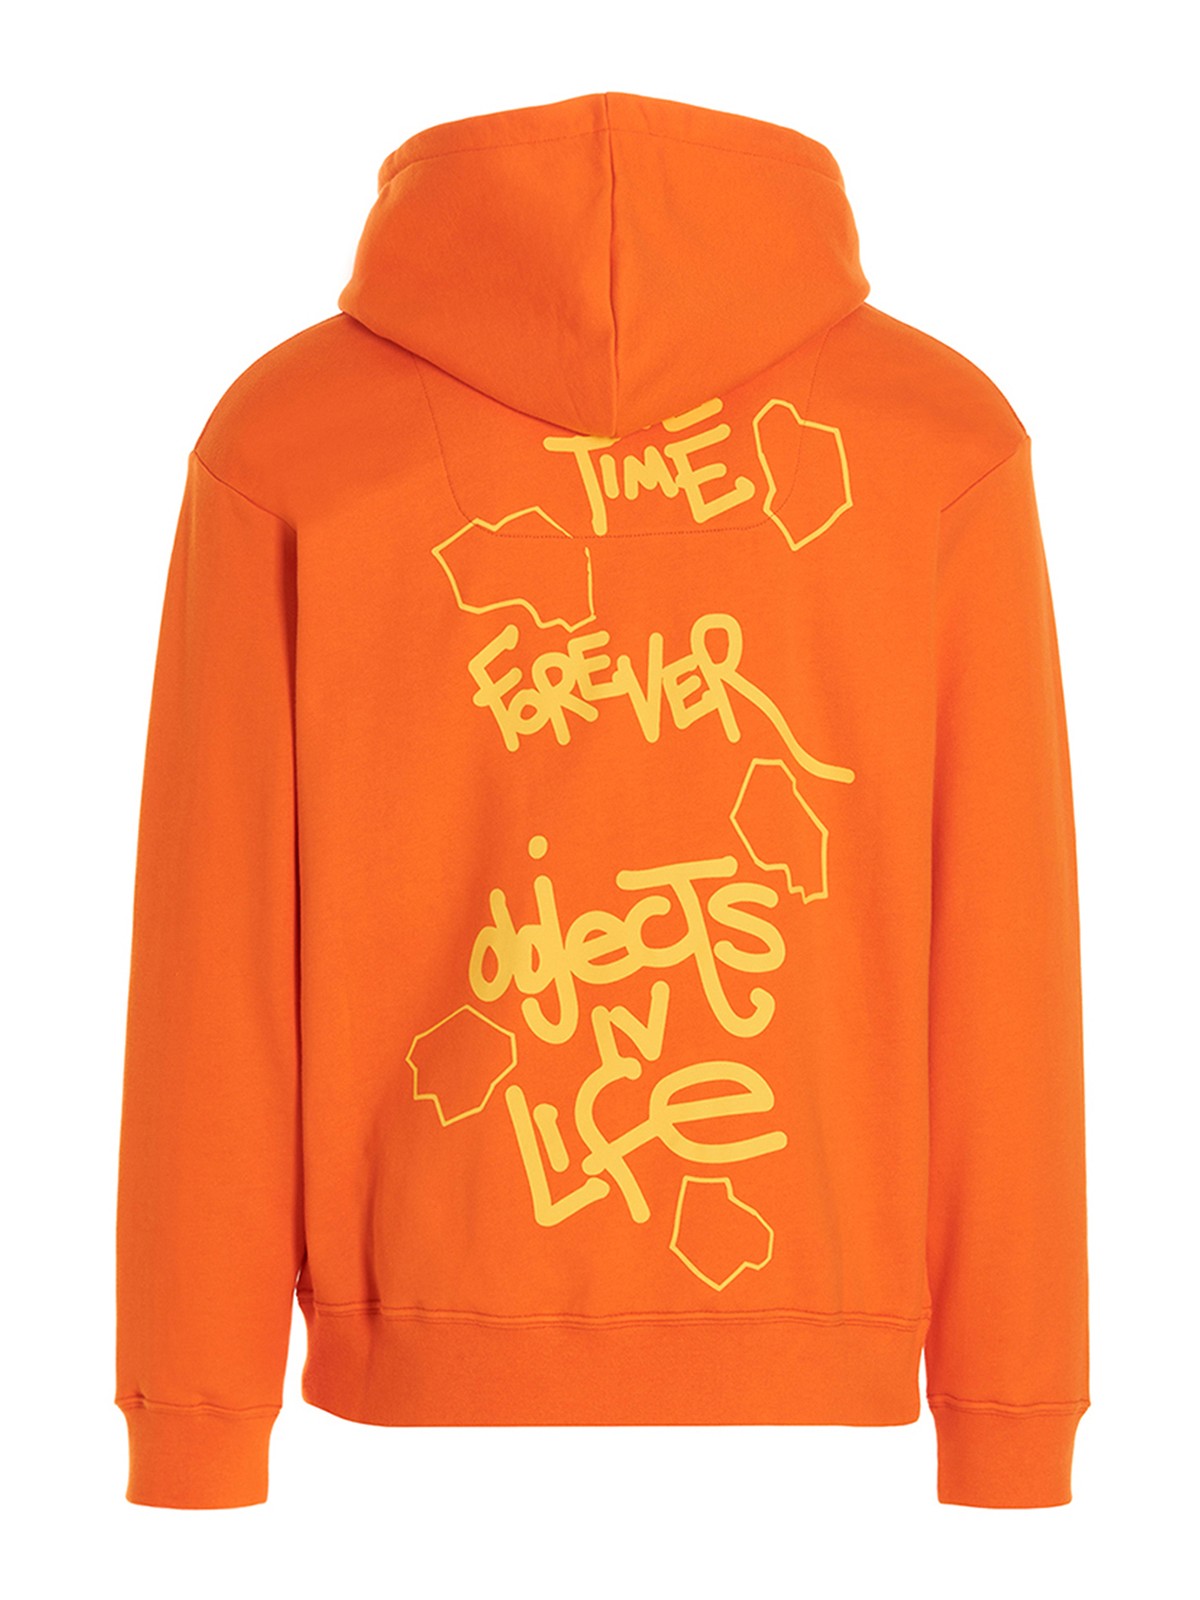 Shop Objects Iv Life Continuity Hoodie In Orange